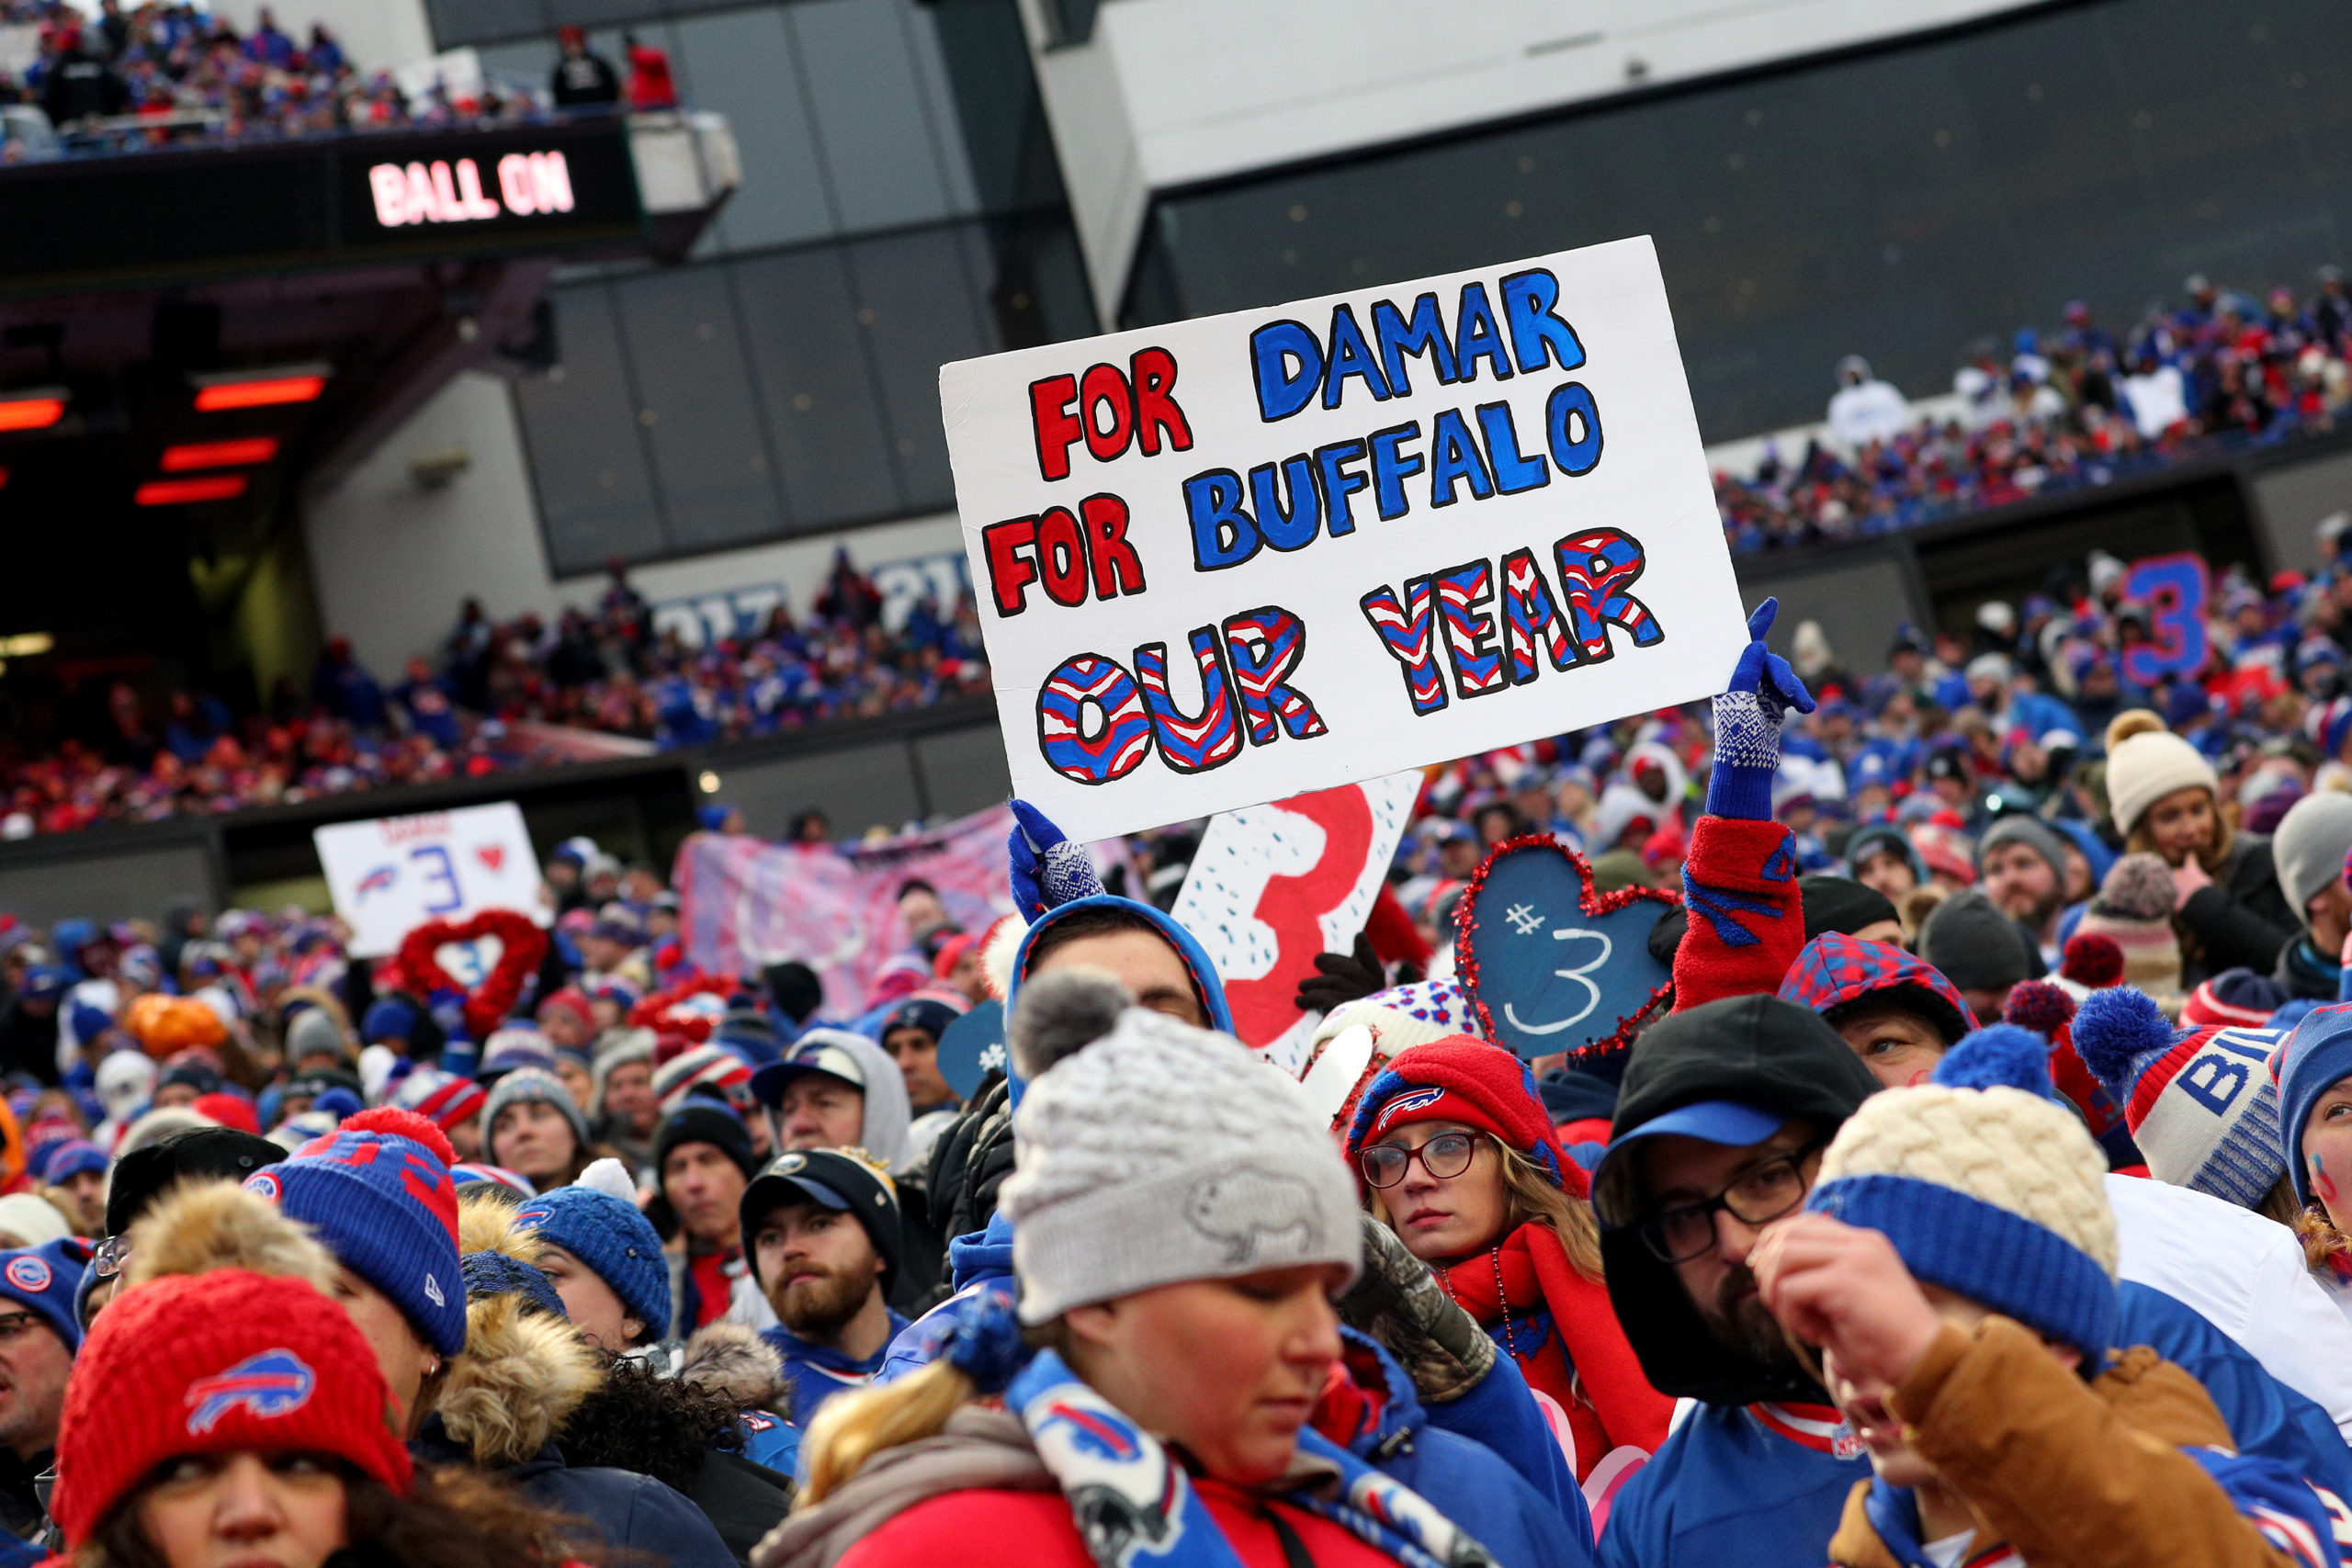 ORCHARD PARK, NEW YORK - JANUARY 08: Fans hold up a sign honoring Damar Hamlin #3 of the Buffalo Bills during the fourth quarter of a game between the Buffalo Bills and the New England Patriots at Highmark Stadium on January 08, 2023 in Orchard Park, New York. (Photo by Bryan Bennett/Getty Images)